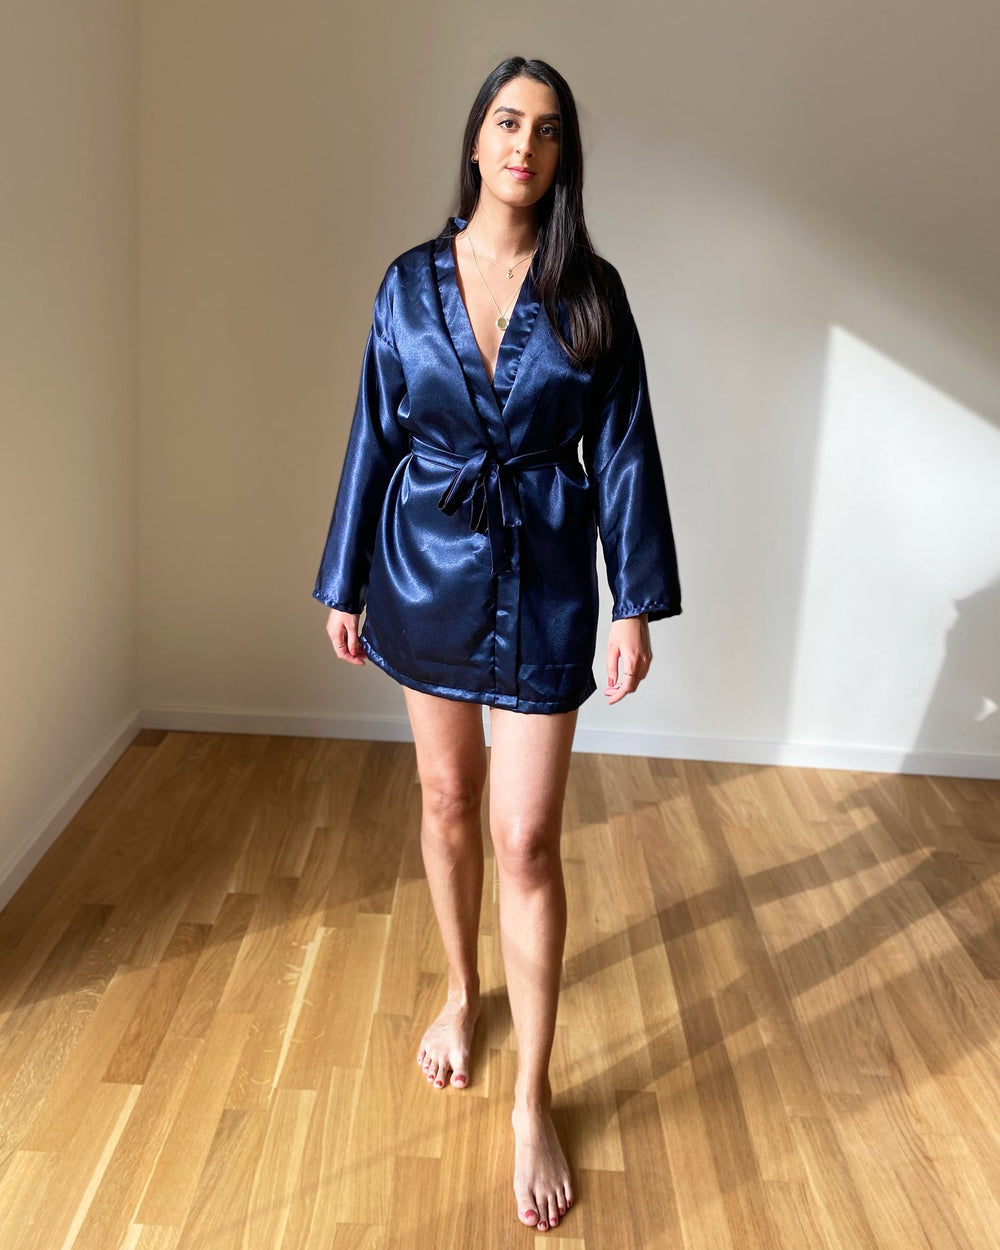 Woman wearing the Hayley Robe sewing pattern from Tammy Handmade on The Fold Line. A robe pattern made in cotton, linen, viscose, satin or silk fabrics, featuring a loose-fitting silhouette, detachable belt, belt loops, dropped shoulders, full-length slee